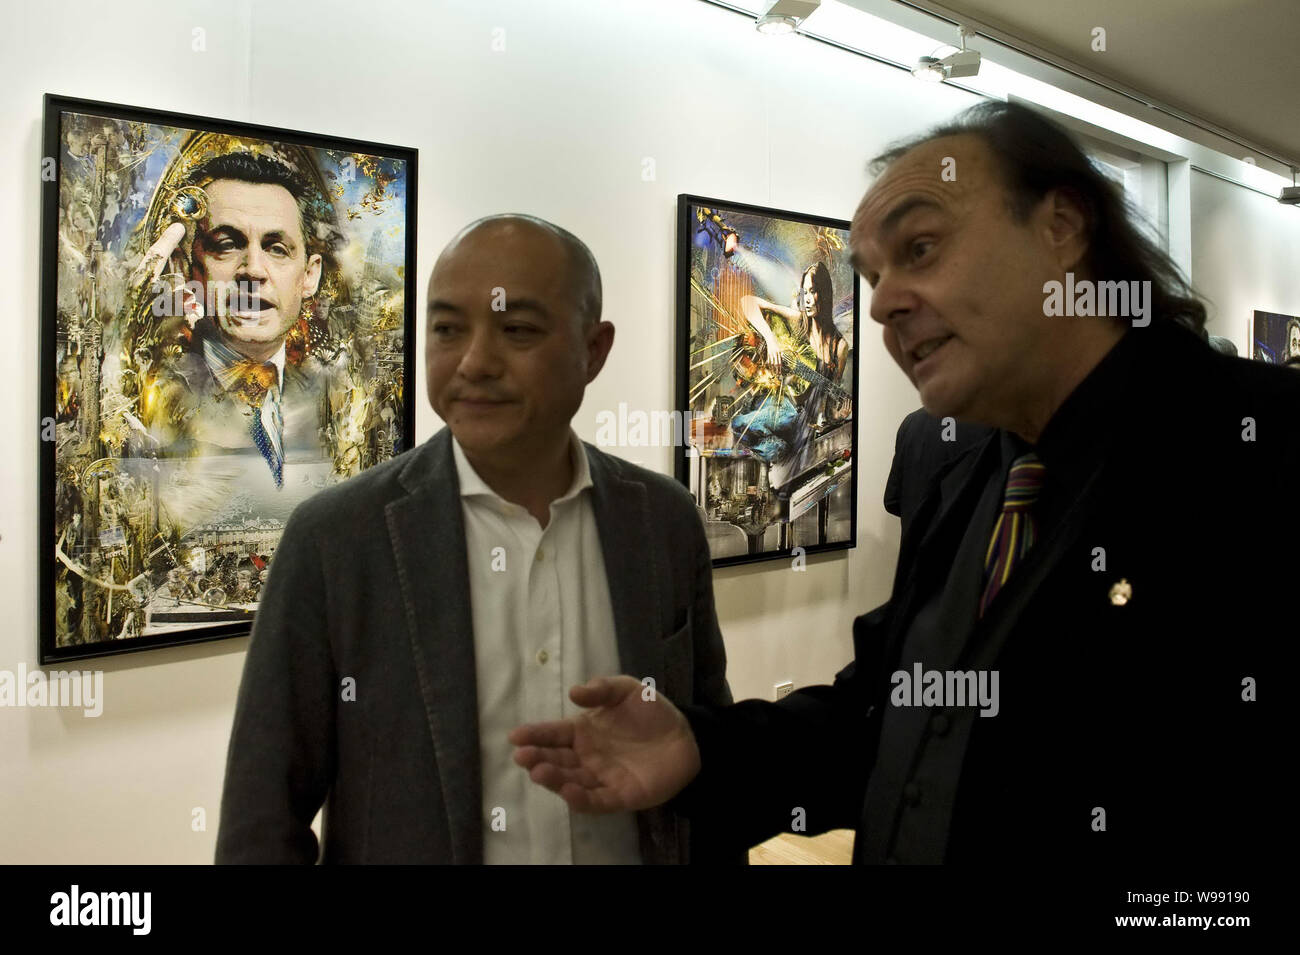 German-born artist Werner Hornung (R) shows visitors art works at an art exhibition featuring the works of him and Pal Sarkozy, father of French Presi Stock Photo